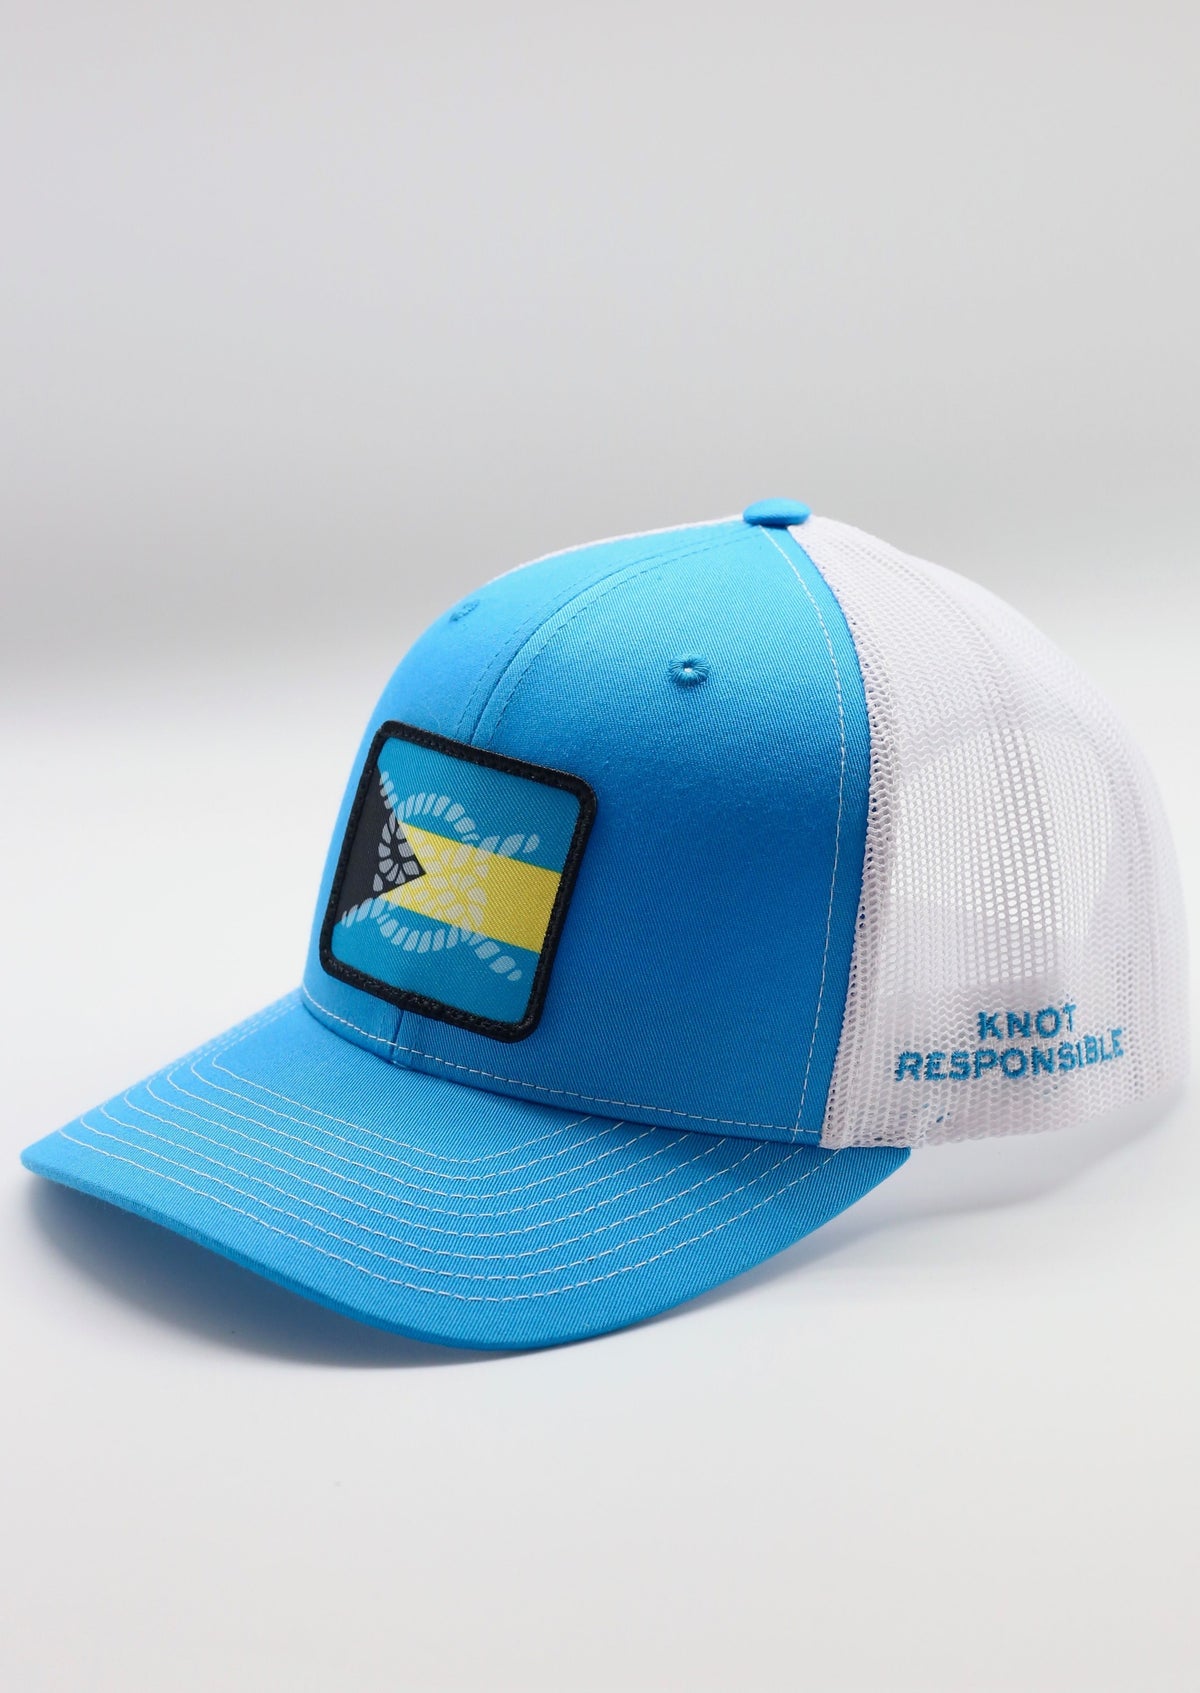 Limited Edition Abaco Strong Original Trucker Hat- Turquoise/ White